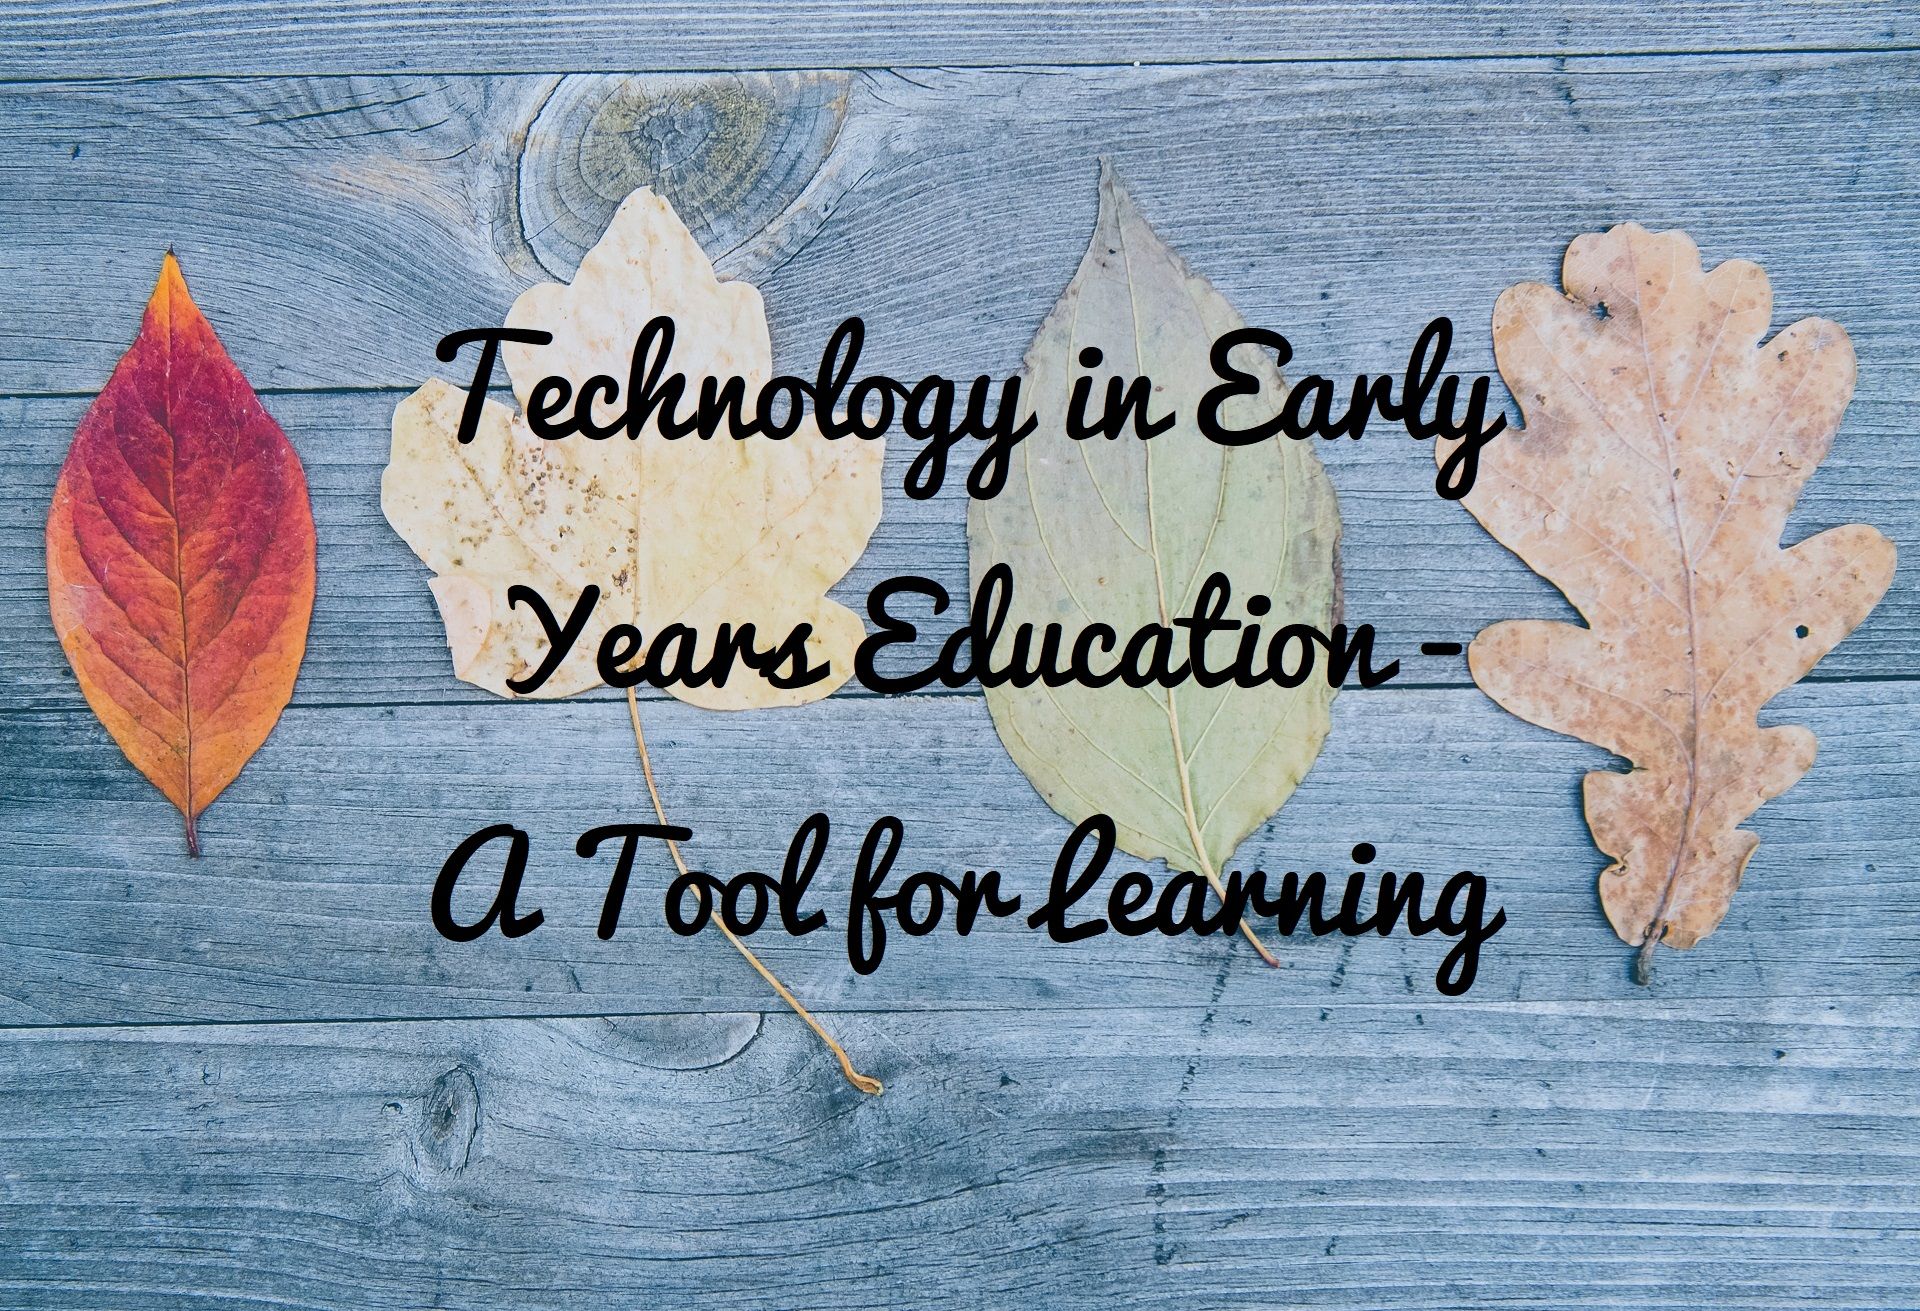 Technology in Early Years Education - A Tool for Learning.